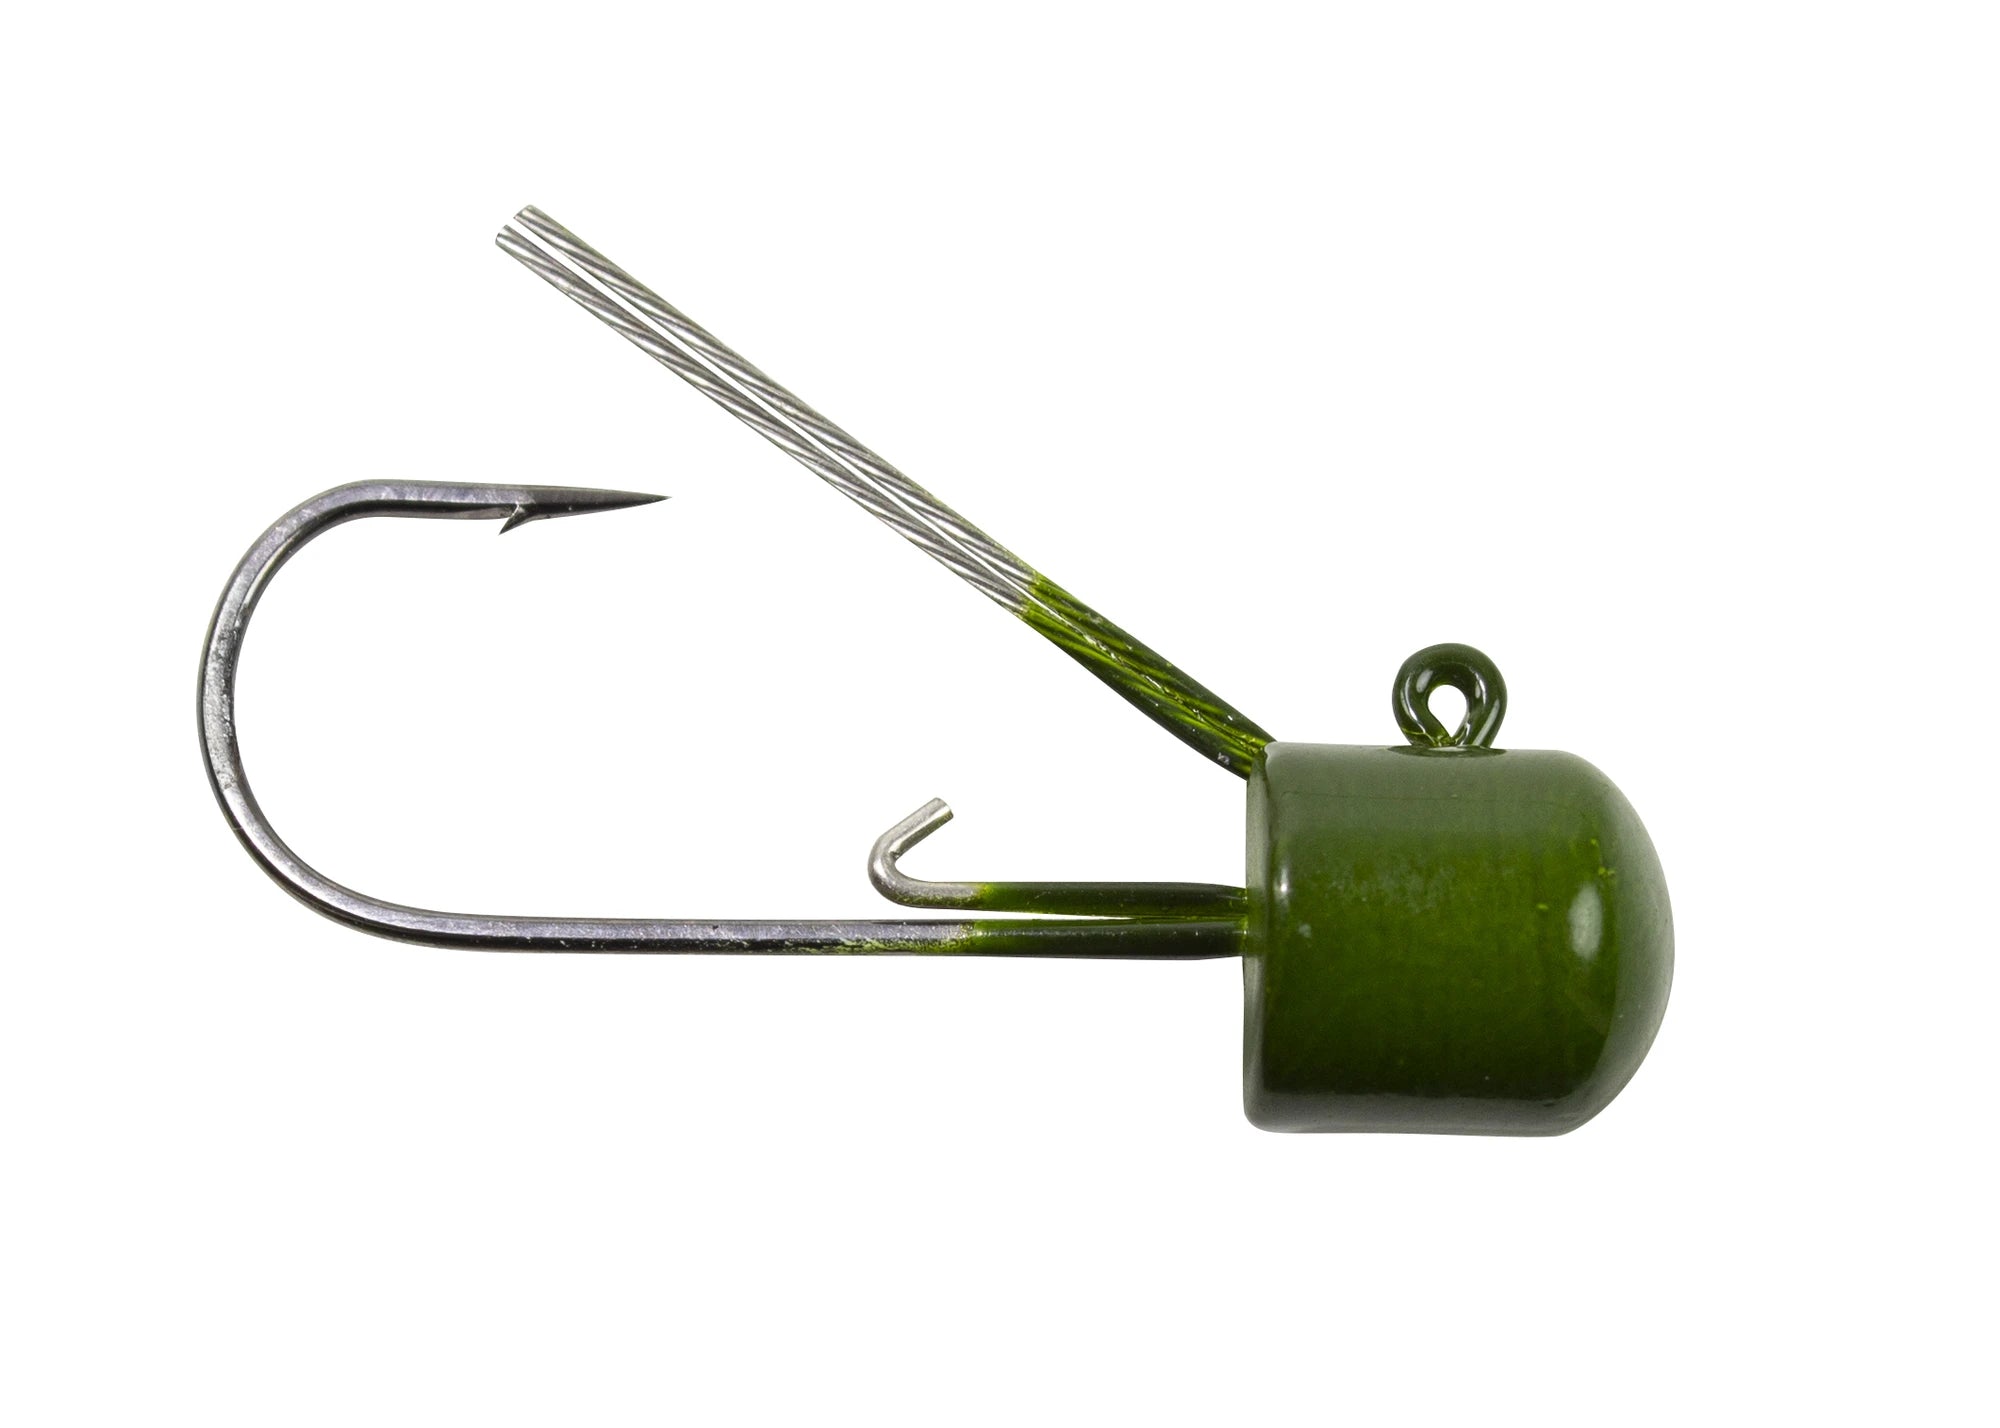 Z-Man Weedless Jig Head Review (Top Pros & Cons)